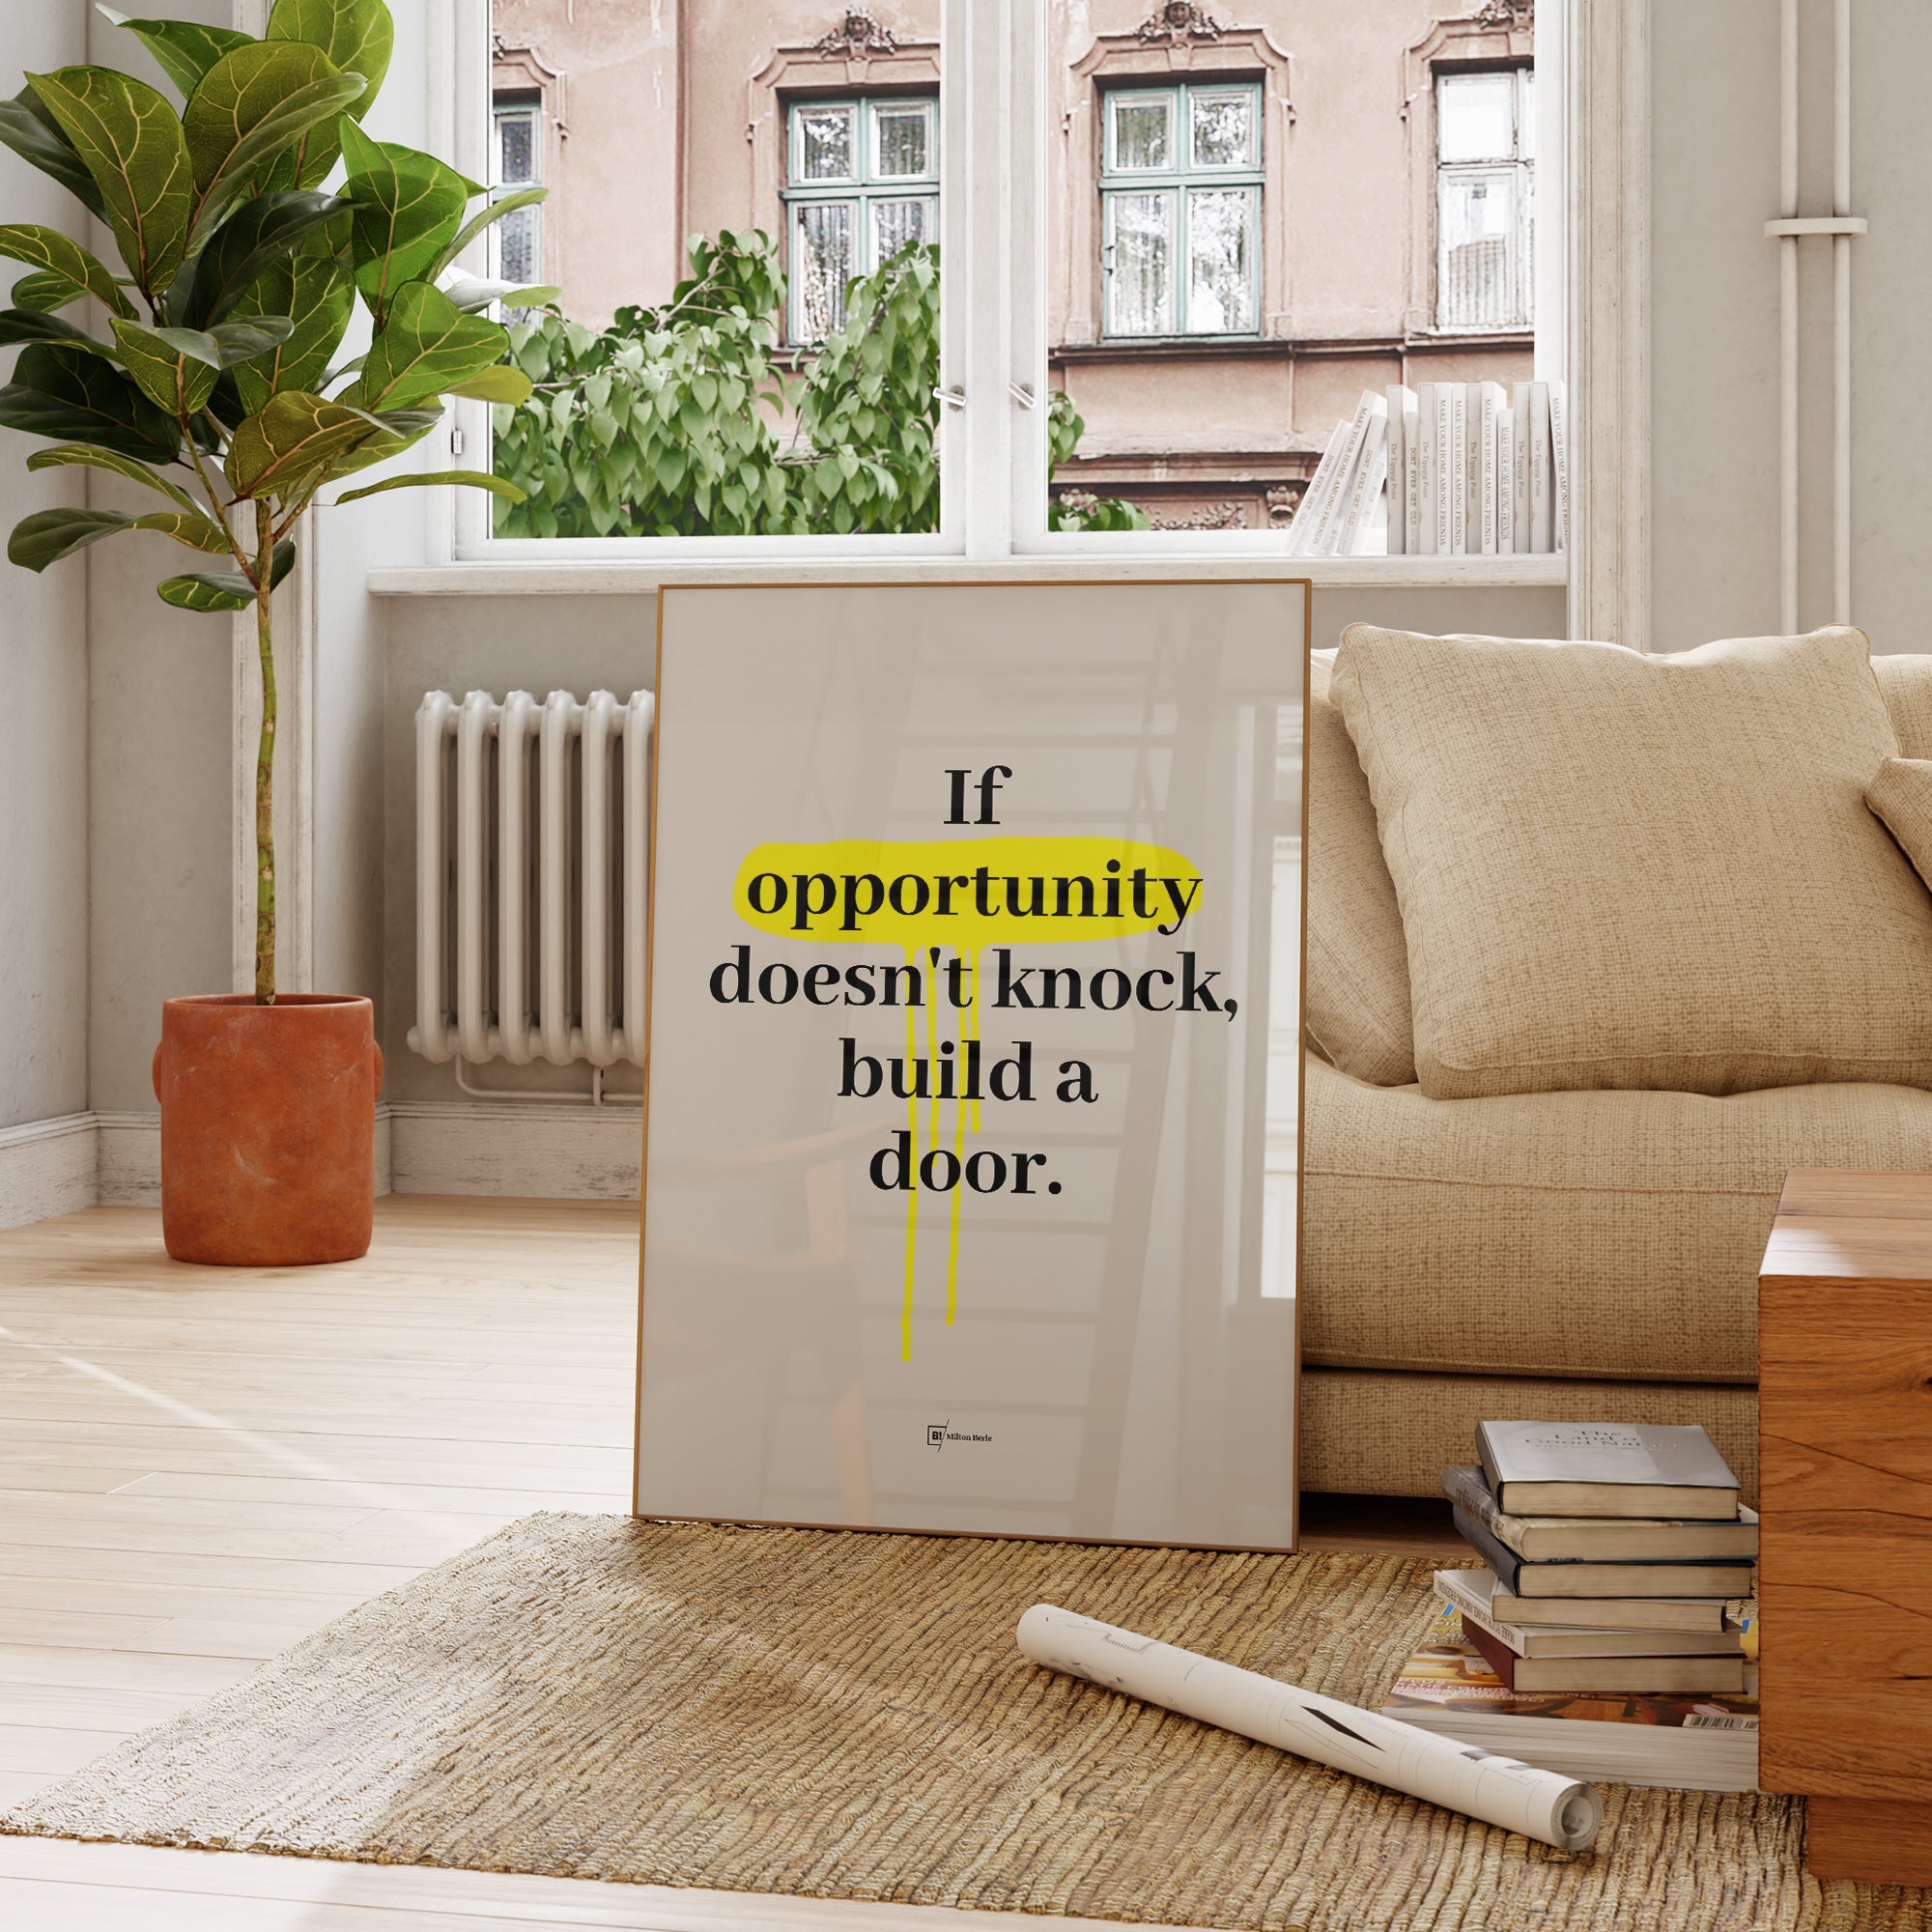 Be inspired by Milton Berle's famous "If opportunity doesn't knock, build a door" quote art print. This artwork was printed using the giclée process on archival acid-free paper and is presented in a french living room that captures its timeless beauty in every detail.